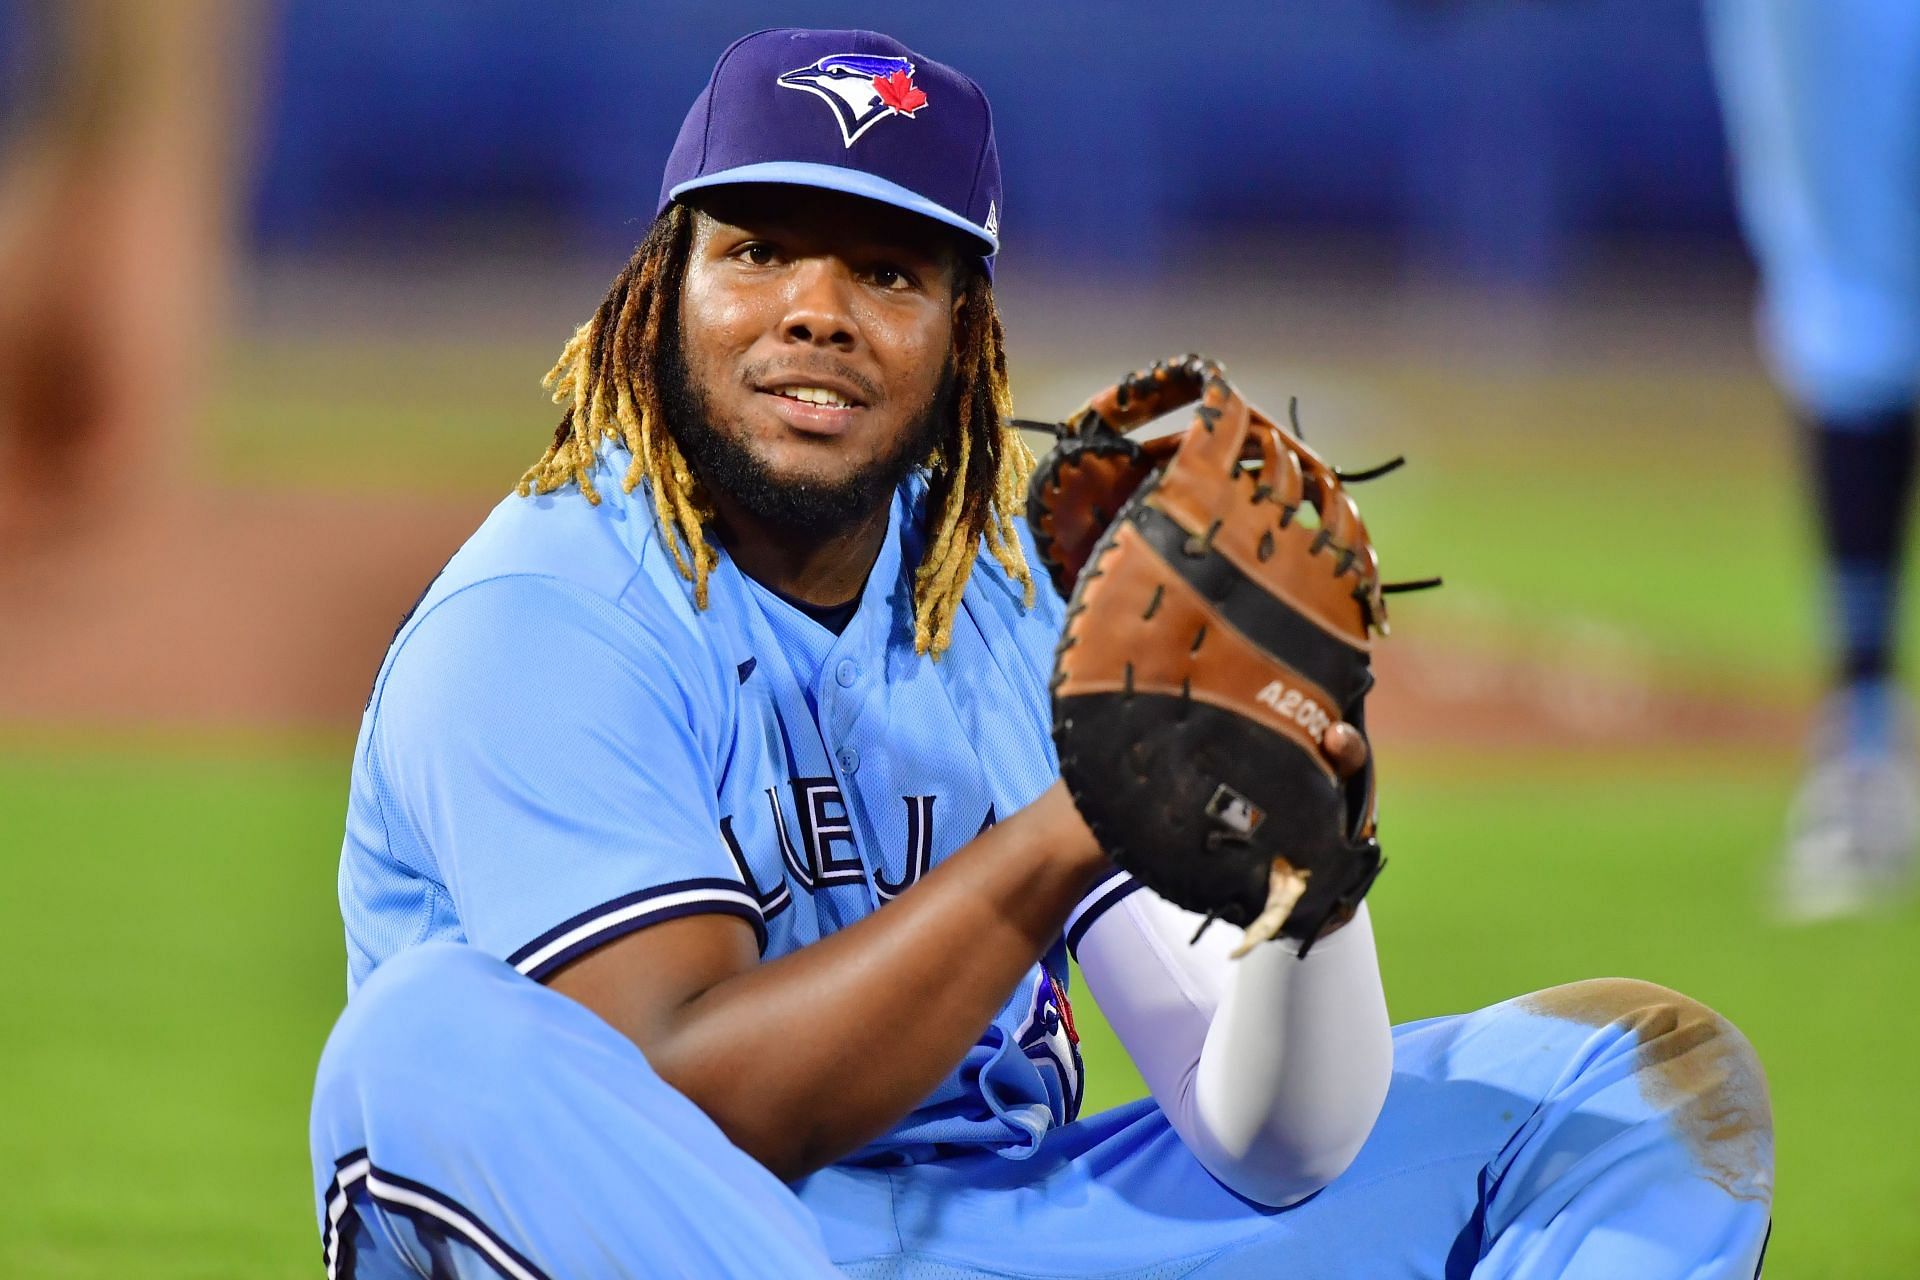 Yankees legend speaks about donning Jays uniform as team's new